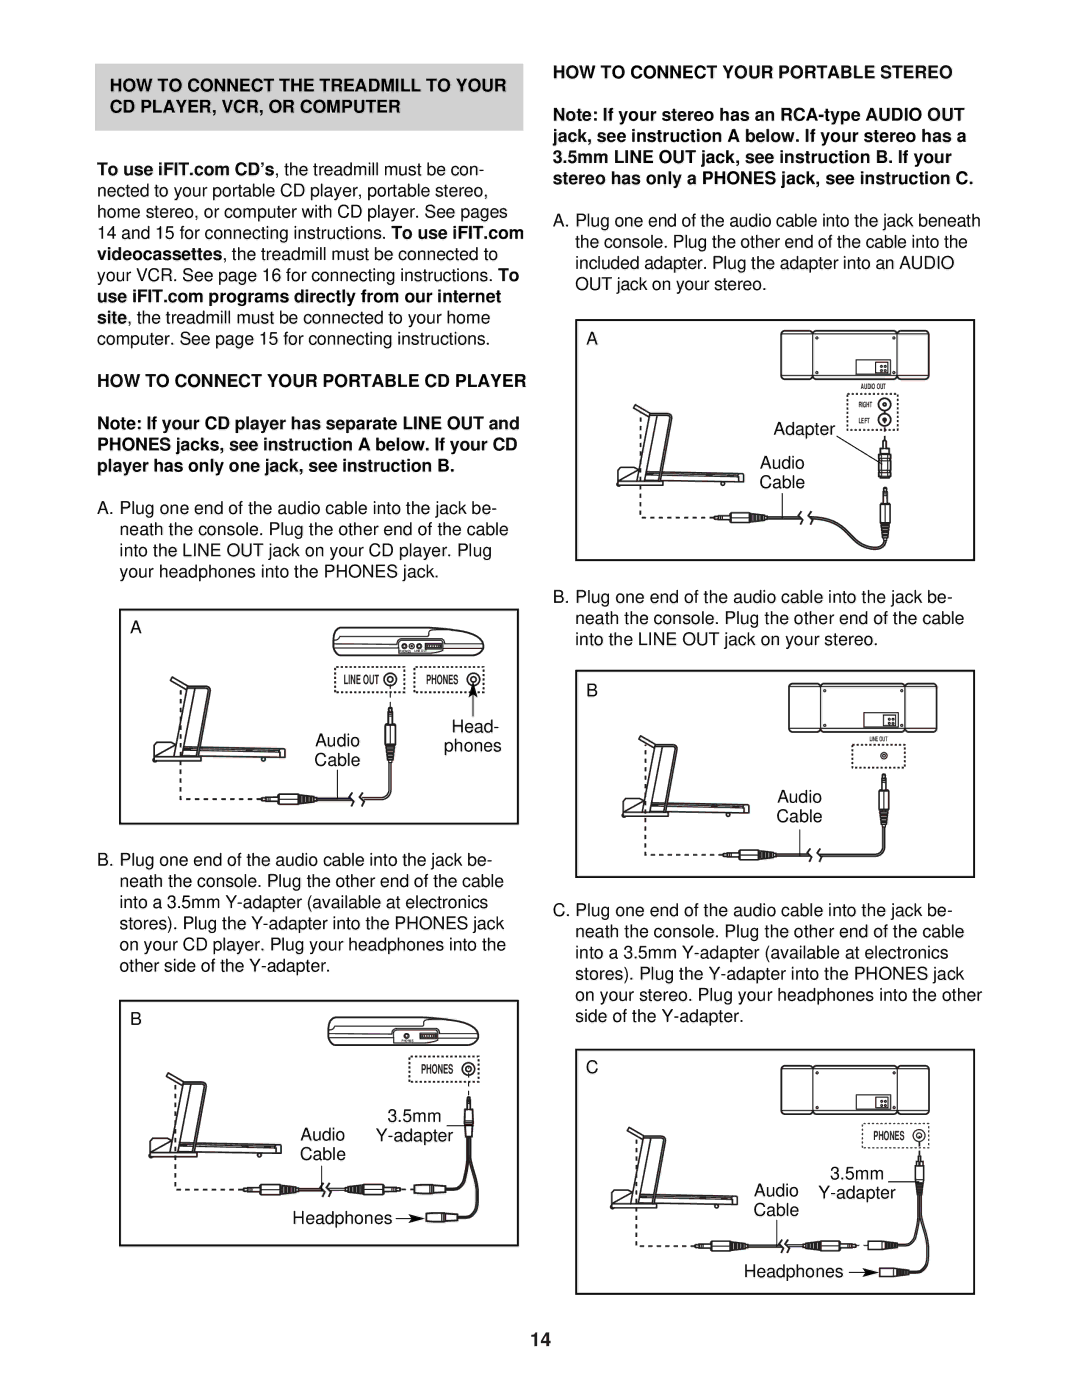 Weslo WLTL39323 user manual HOW to Connect Your Portable Stereo 